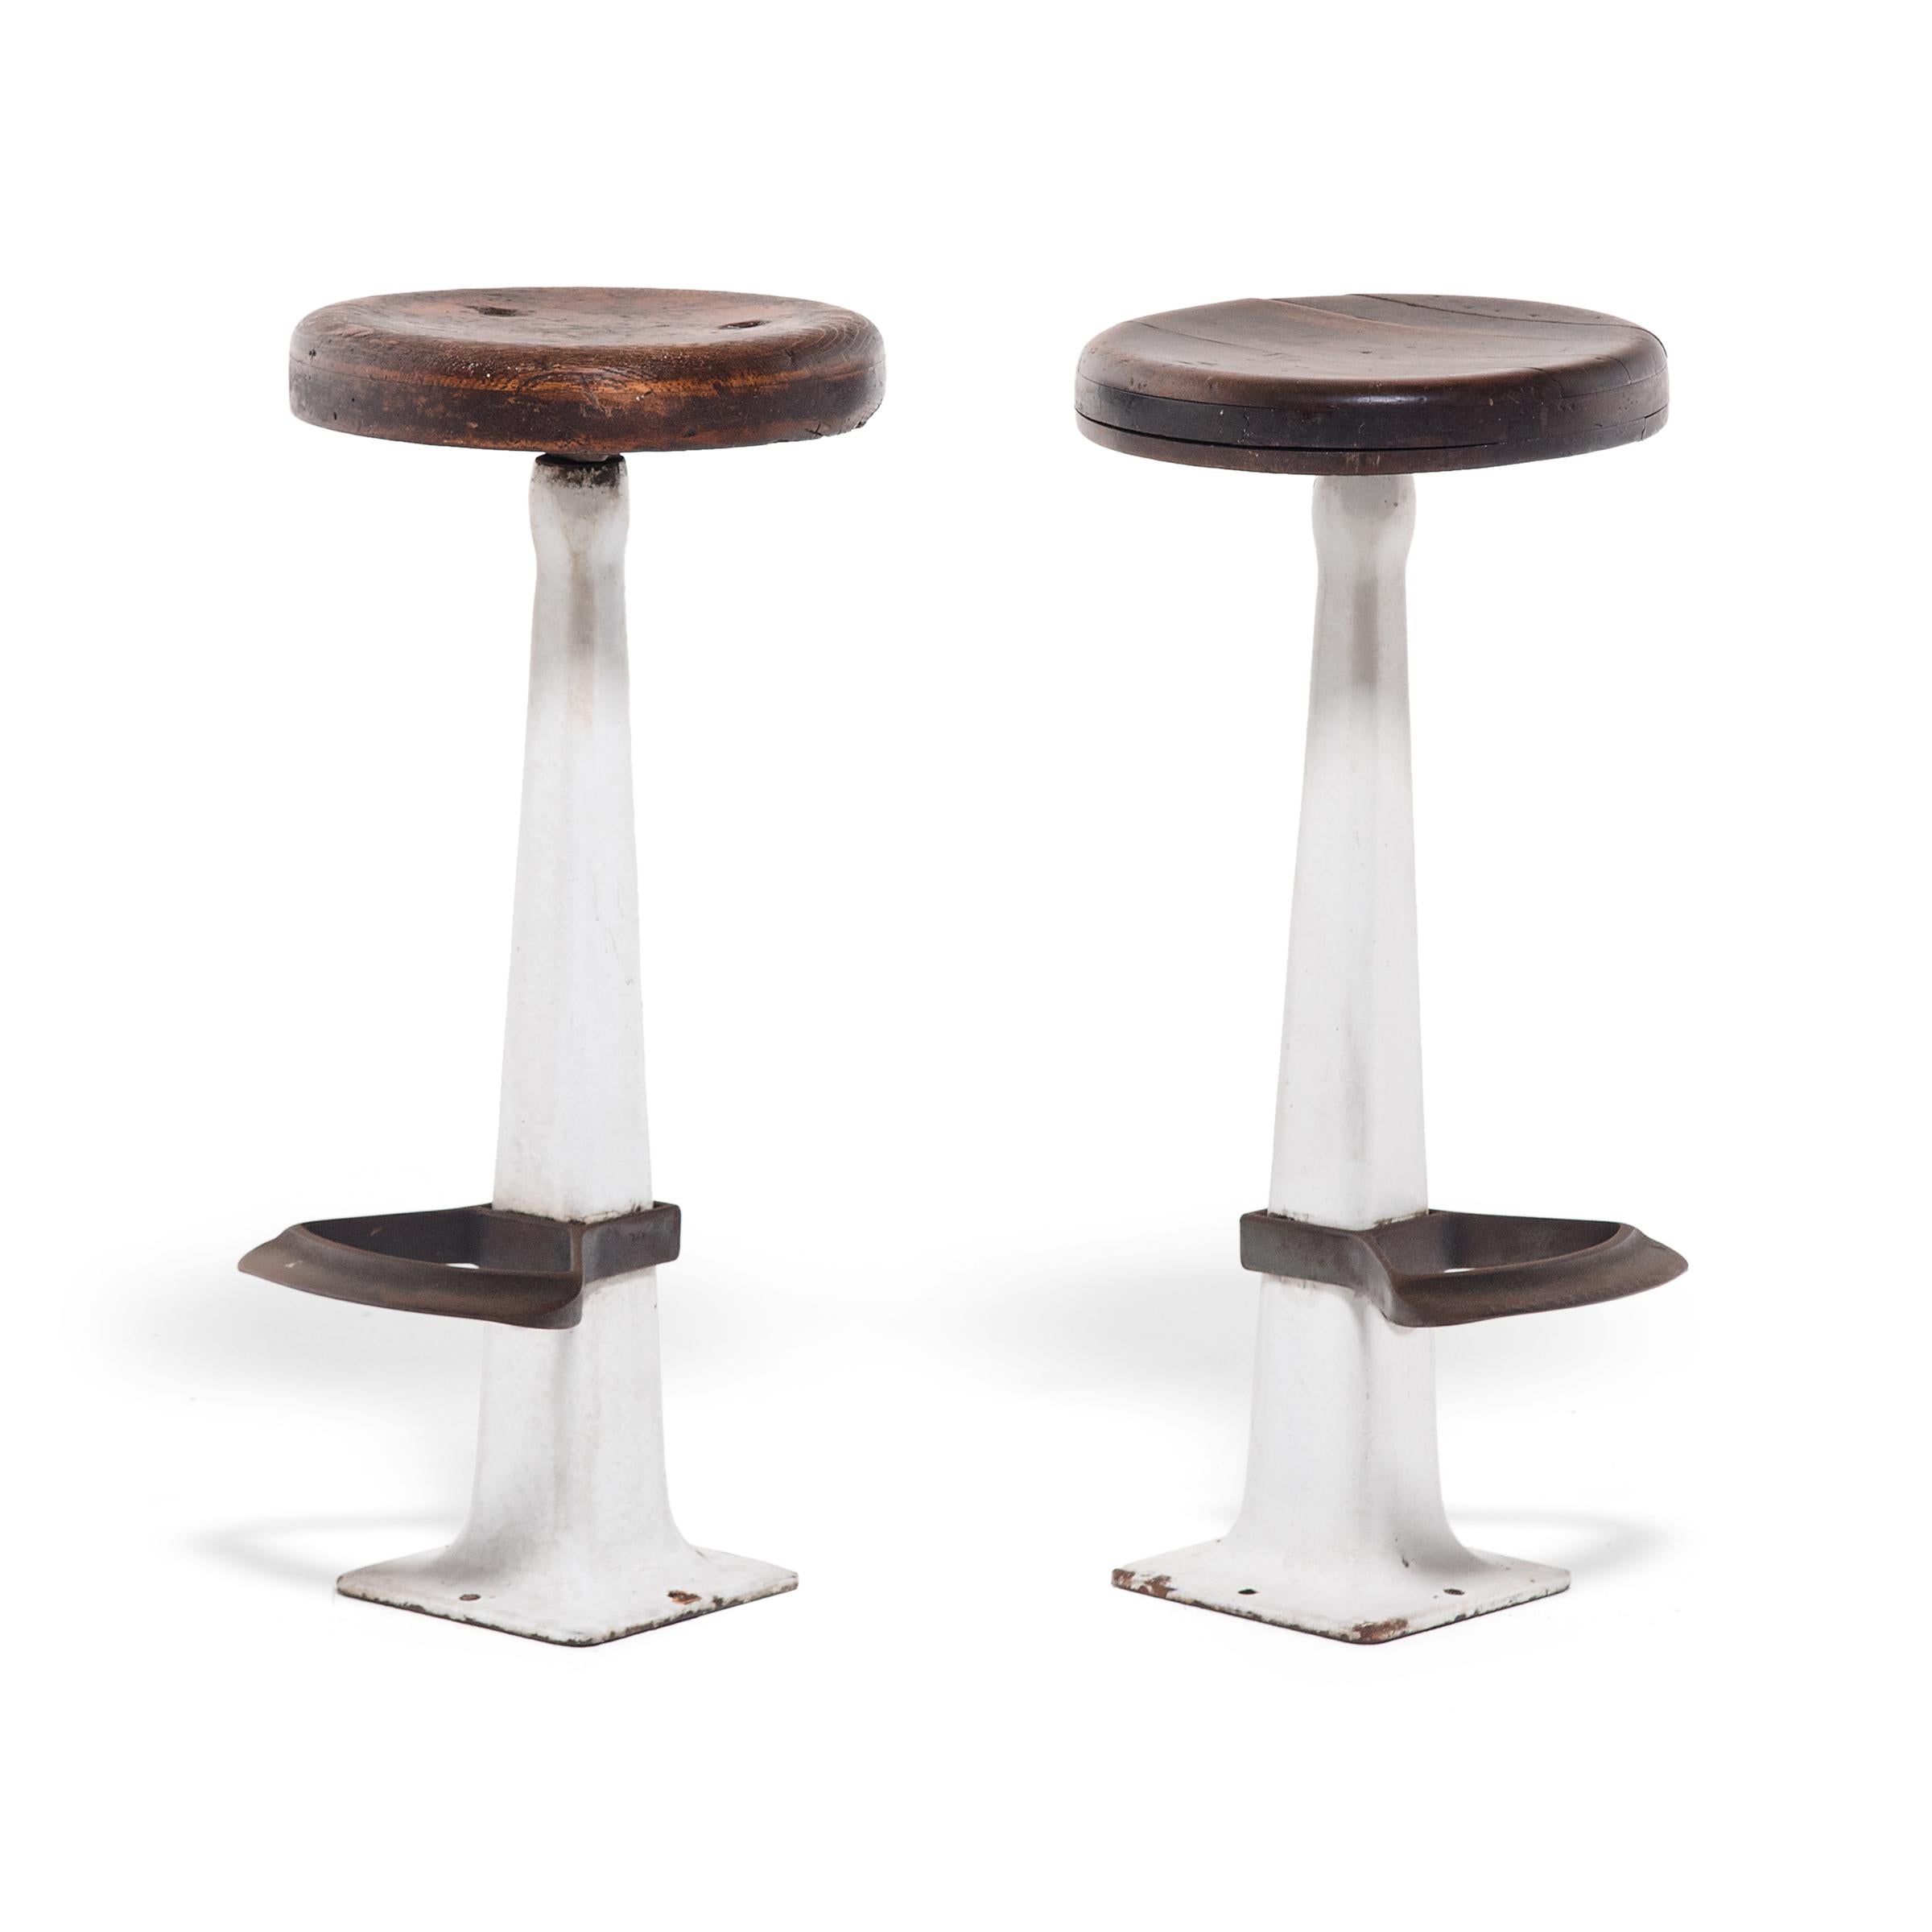 https://a.1stdibscdn.com/pair-of-porcelain-enamel-soda-fountain-stools-with-wood-seats-c-1930s-for-sale-picture-2/f_8200/f_218532421608313042586/CDWR003_004_master.jpg